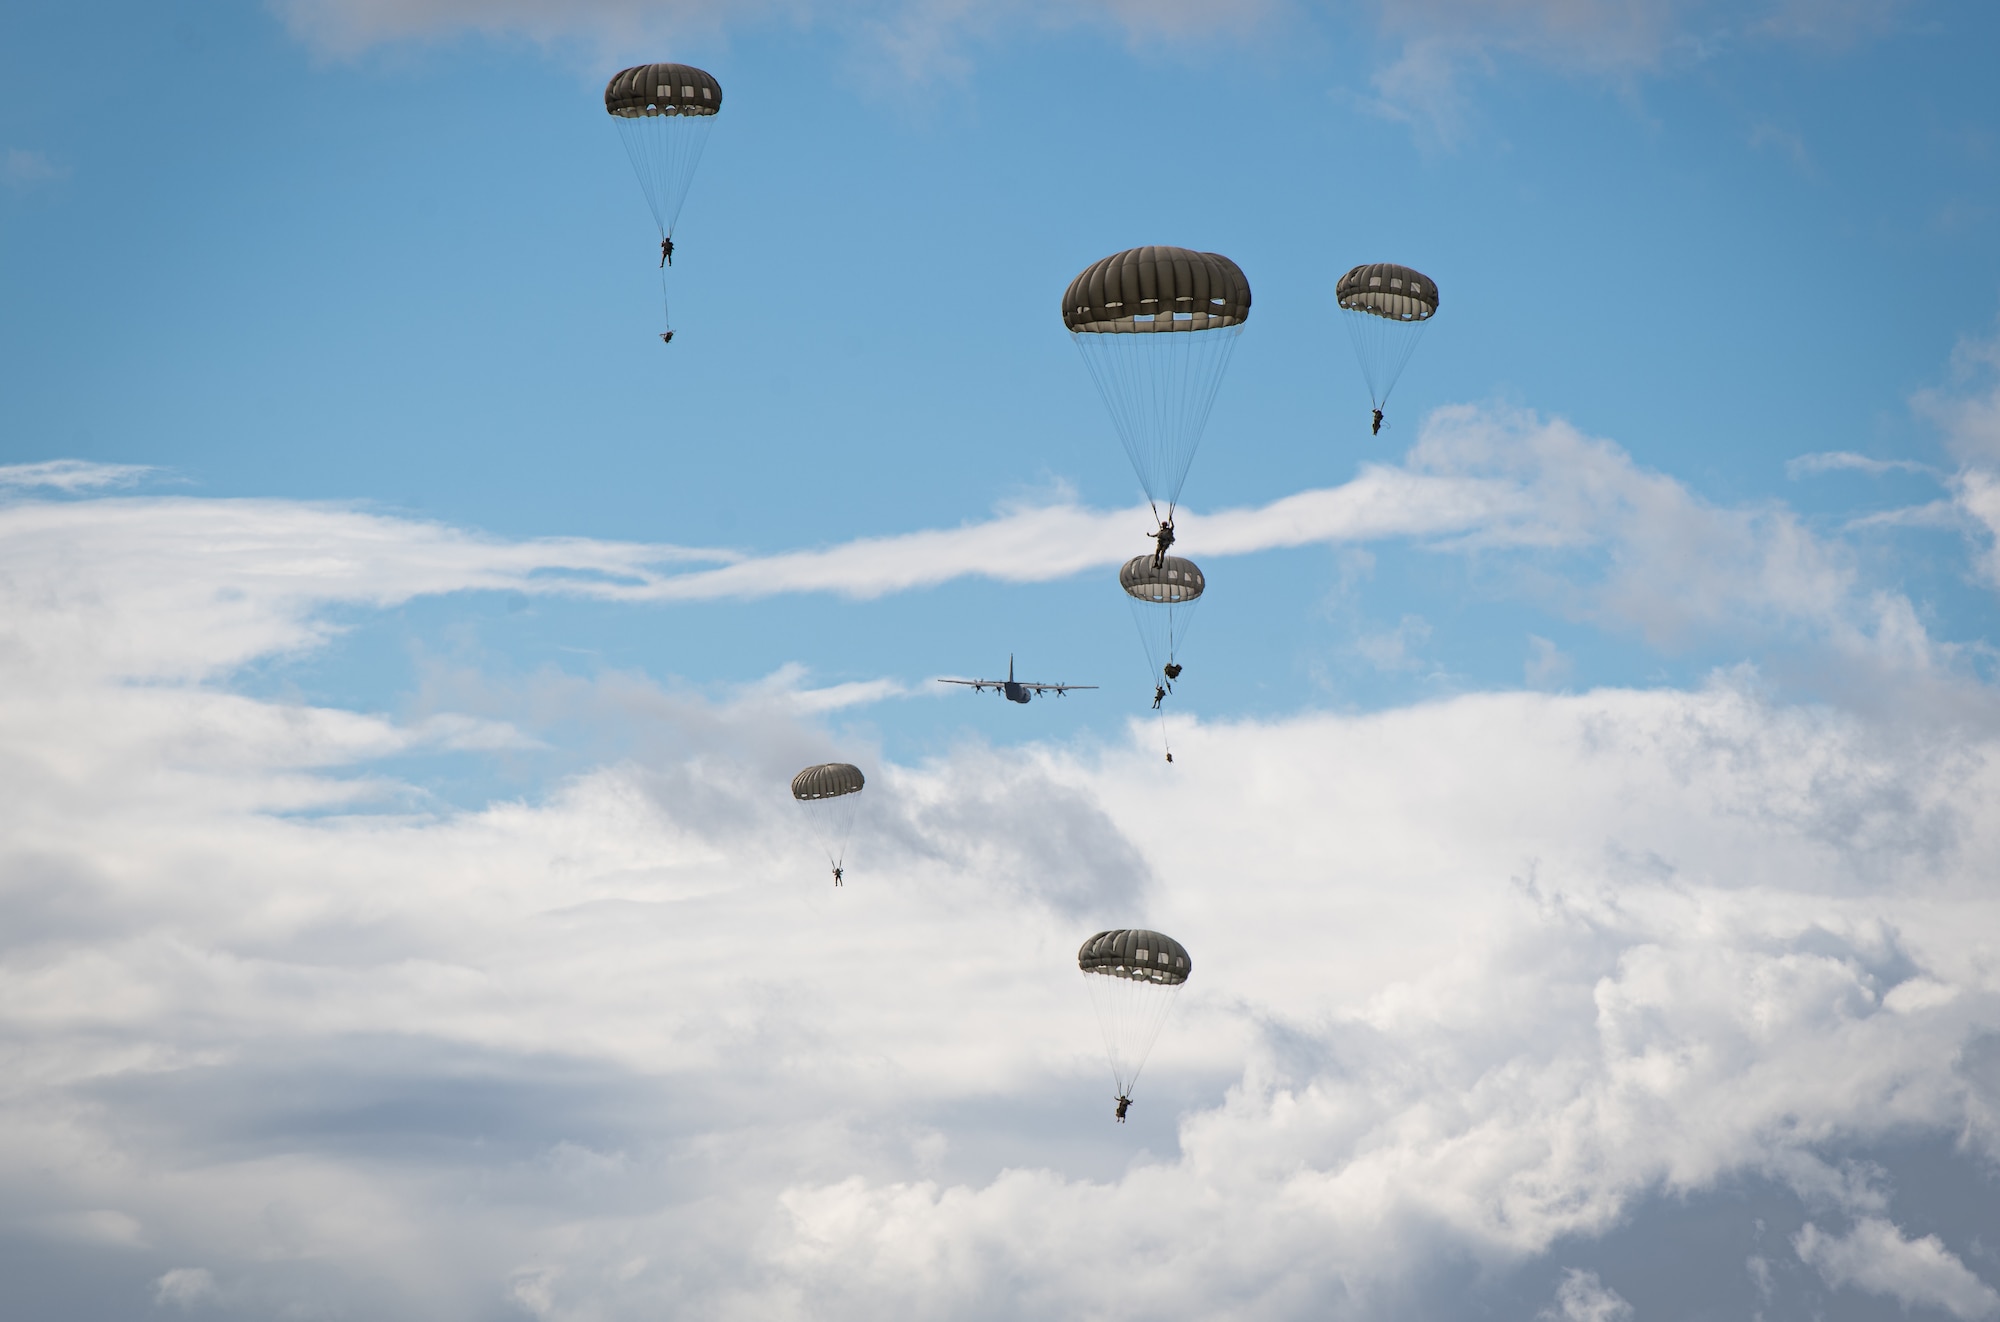 Airmen assigned to the 435th Contingency Response Group jump out of a C-130J Super Hercules aircraft assigned to the 37th Airlift Squadron during exercise Agile Wolf 22 at Koszalin, Poland, Sept. 14, 2022. Eleven Airmen from the 435th CRG conducted a airbourne insertion and airfield assessment for follow-on forces. (U.S. Air Force photo by Airman 1st Class Jared Lovett)